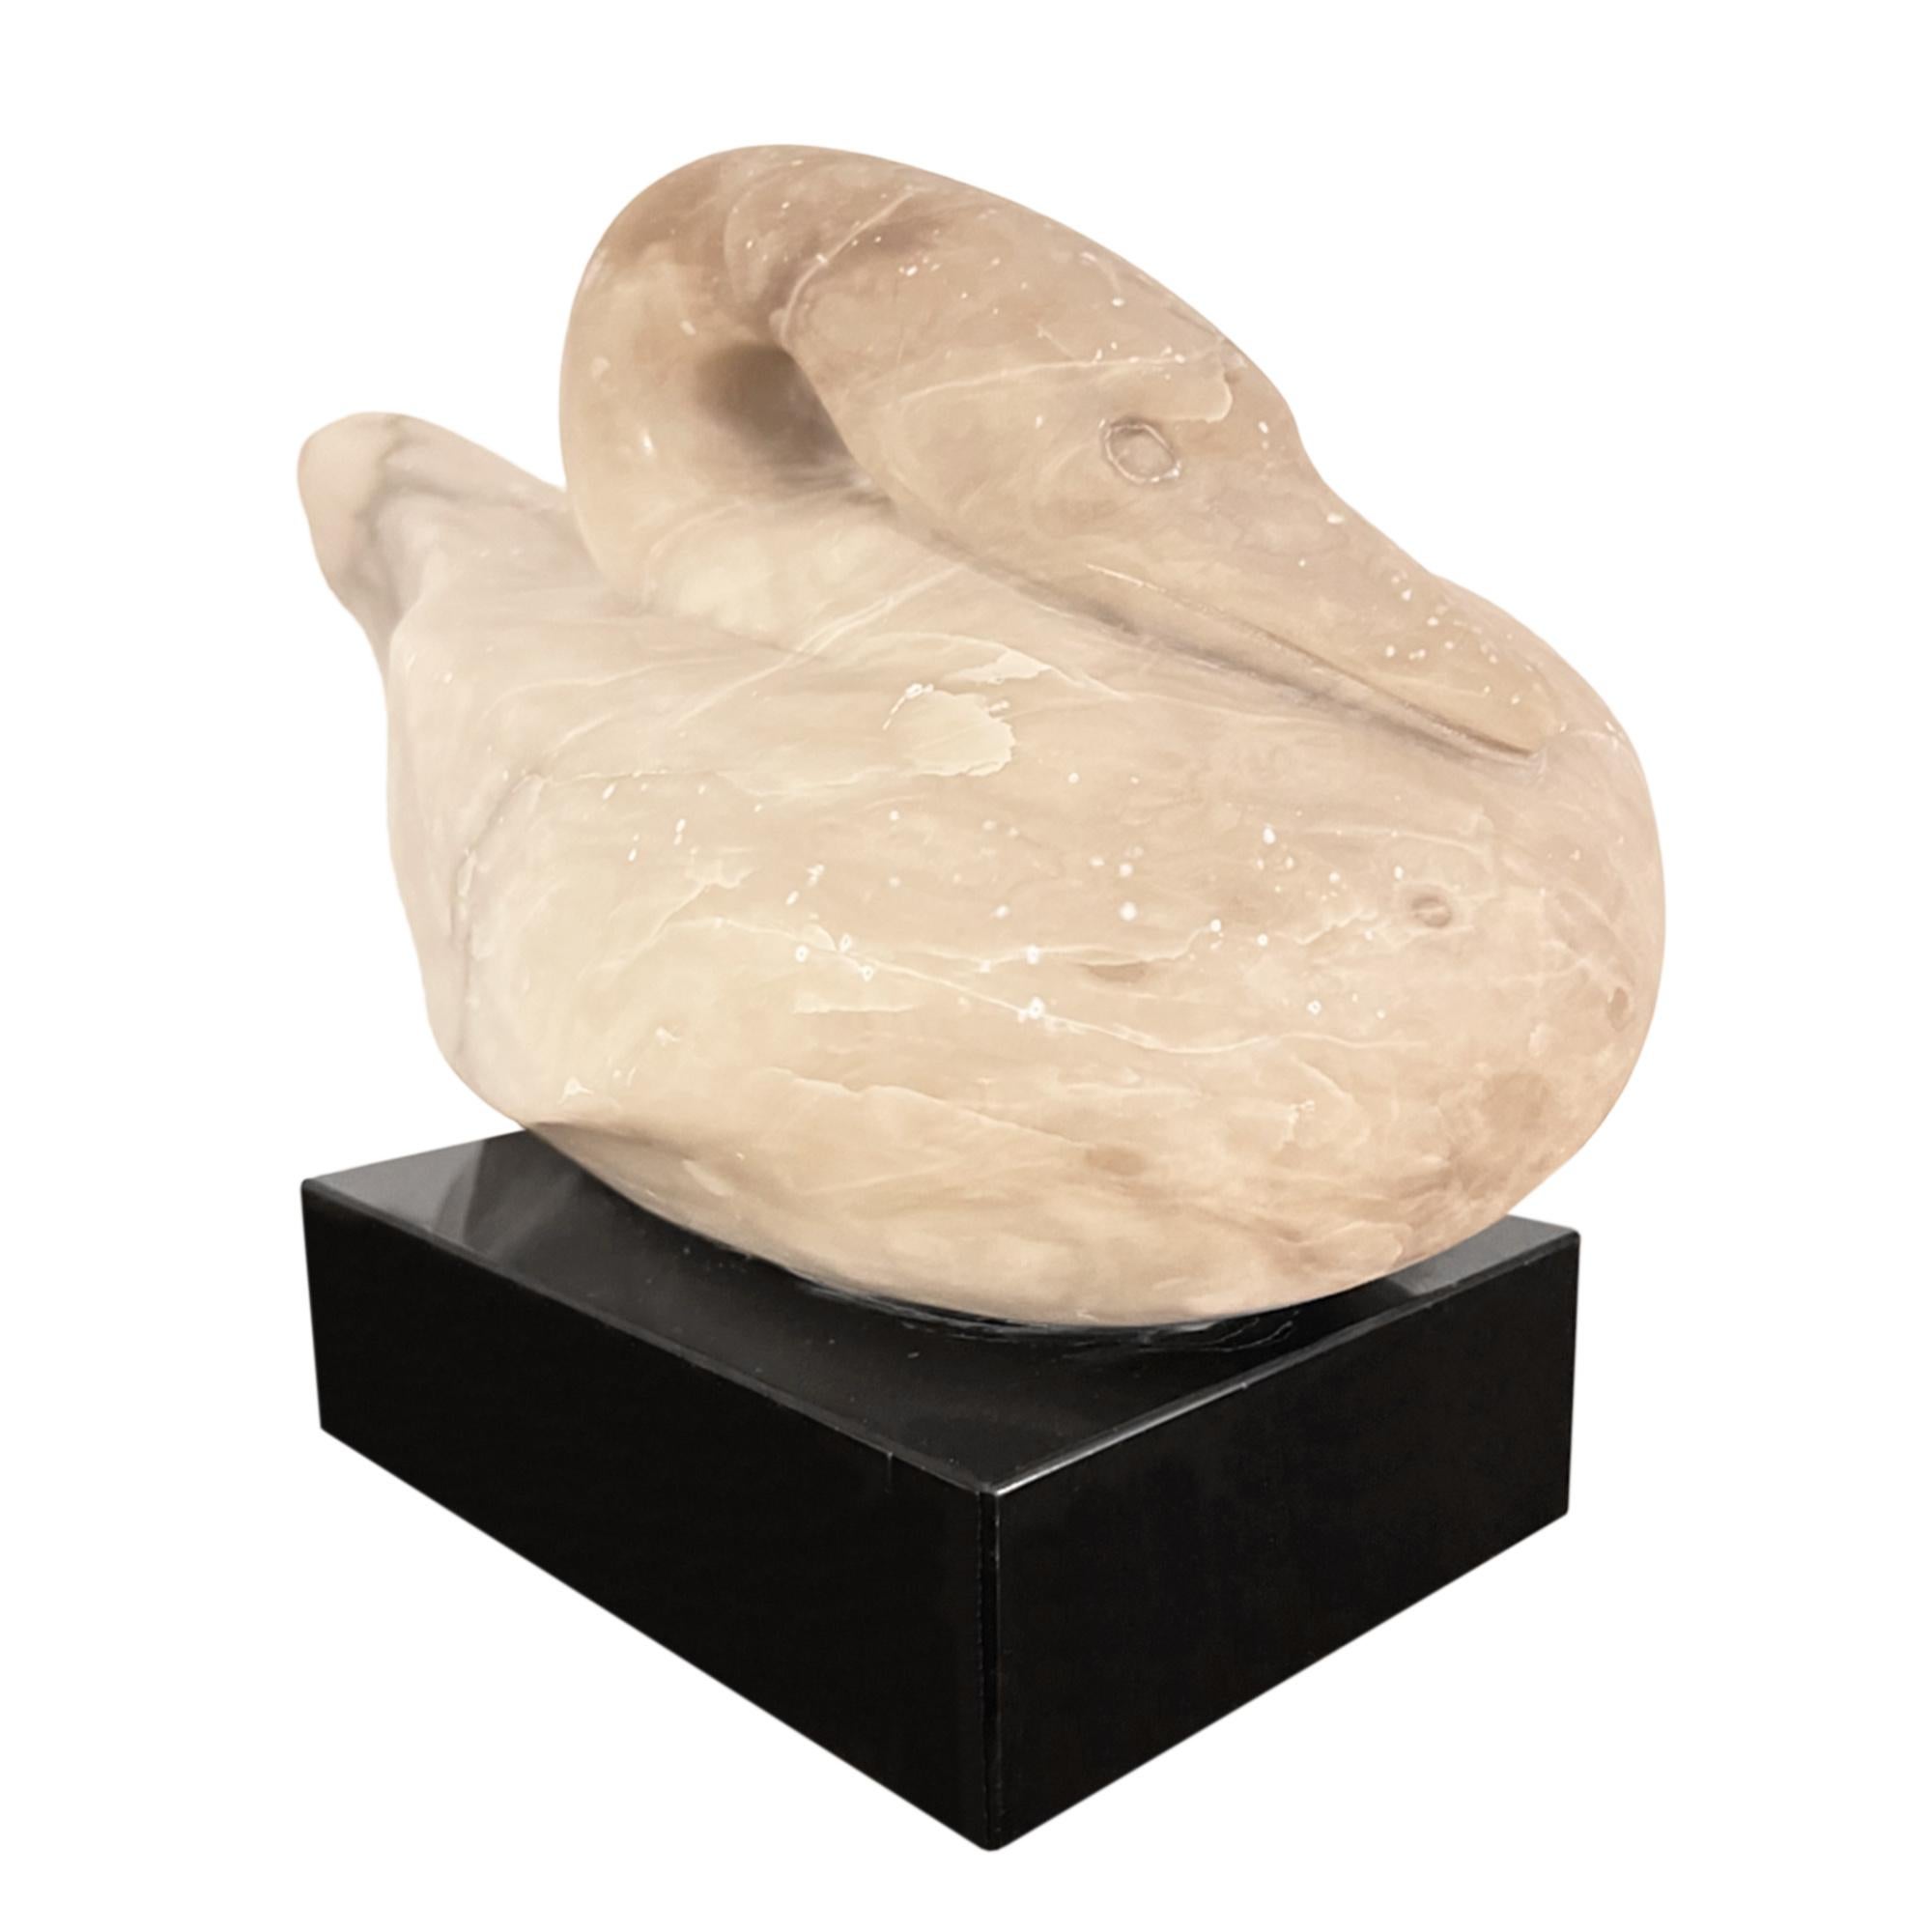 American Onyx Swan Sculpture on a Rotating Plinth, By Ralph Hurst For Sale